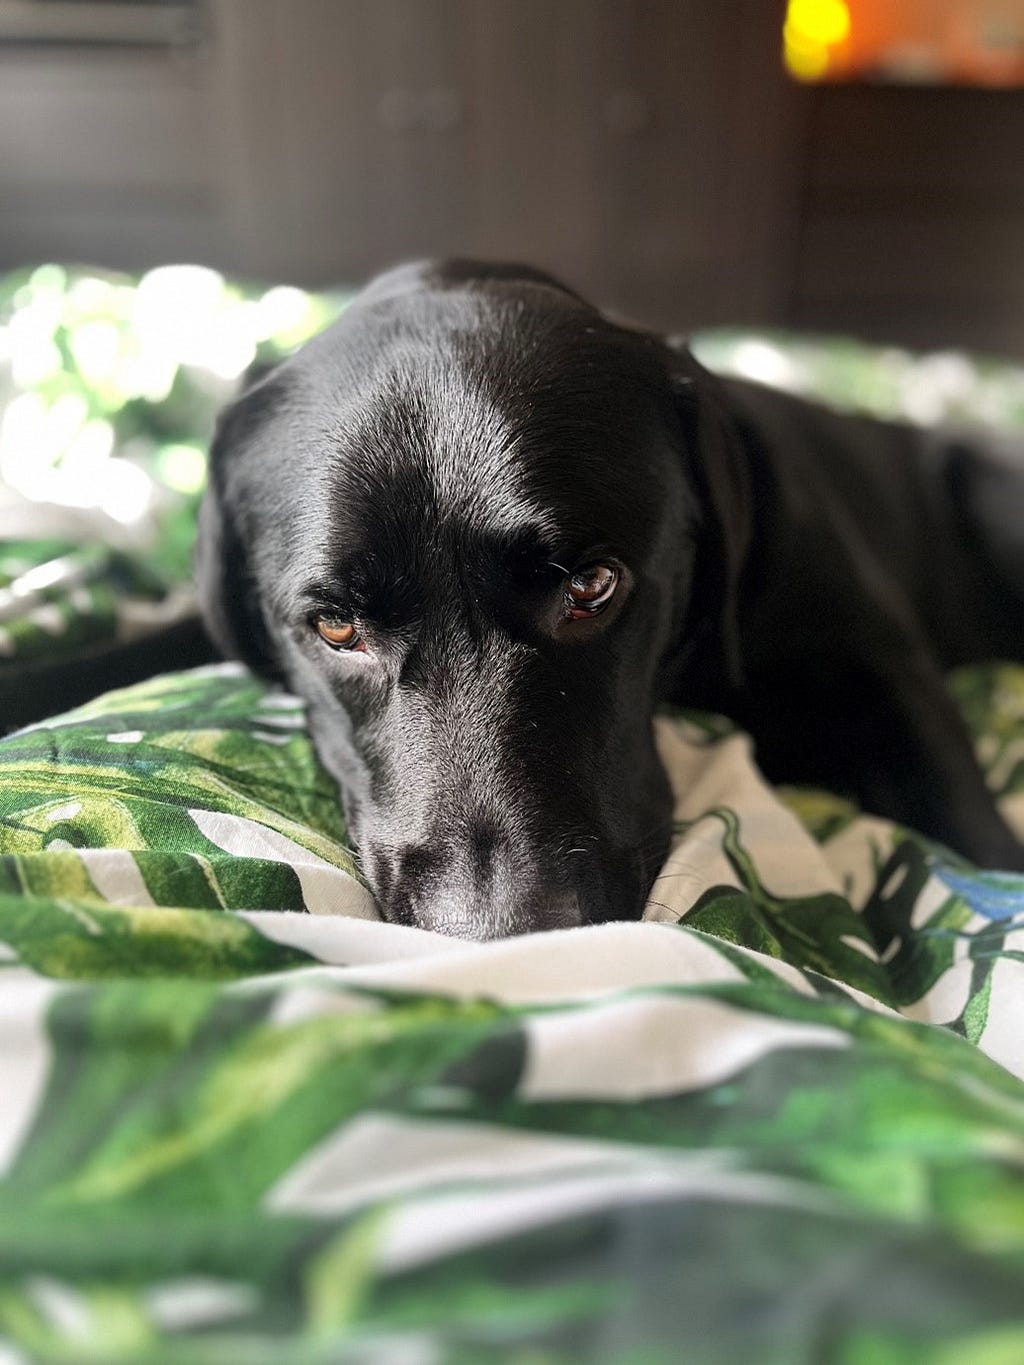 Black labrador giving puppy eyes laying on a foliage patterned duvet